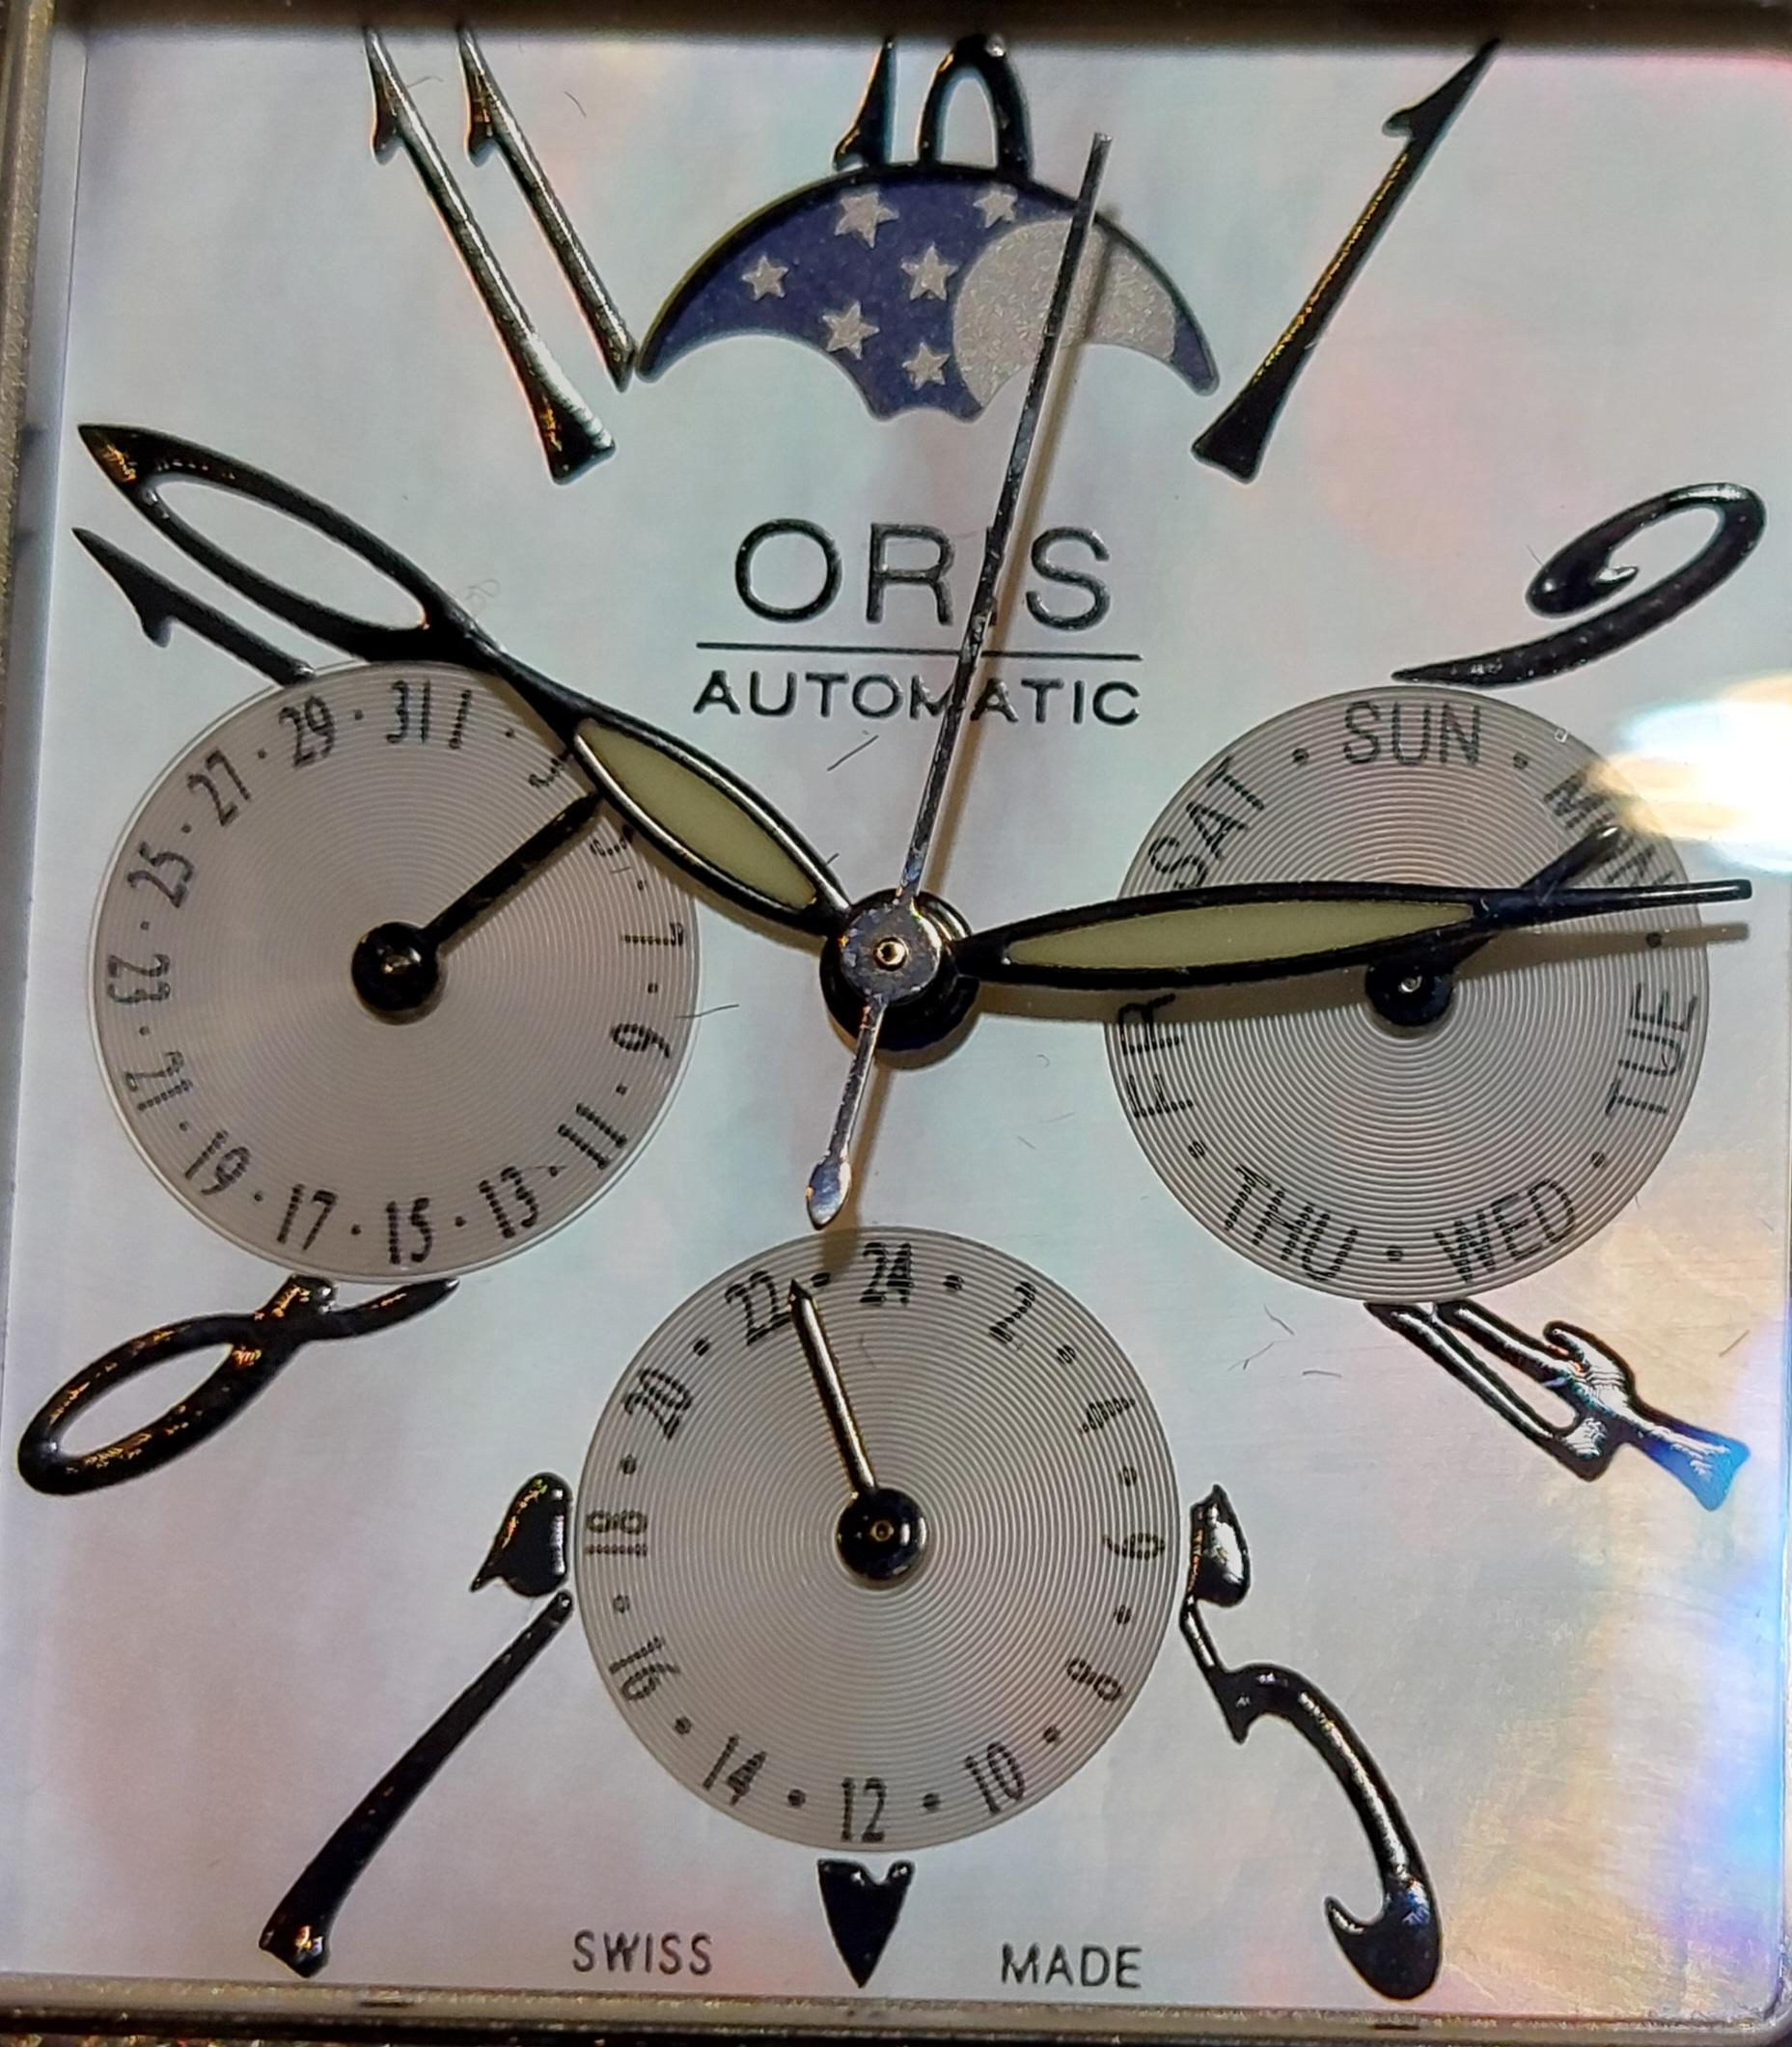 New Oris Automatic Rectangular Miles Complication Moonphase Diamond Watch For Sale 7